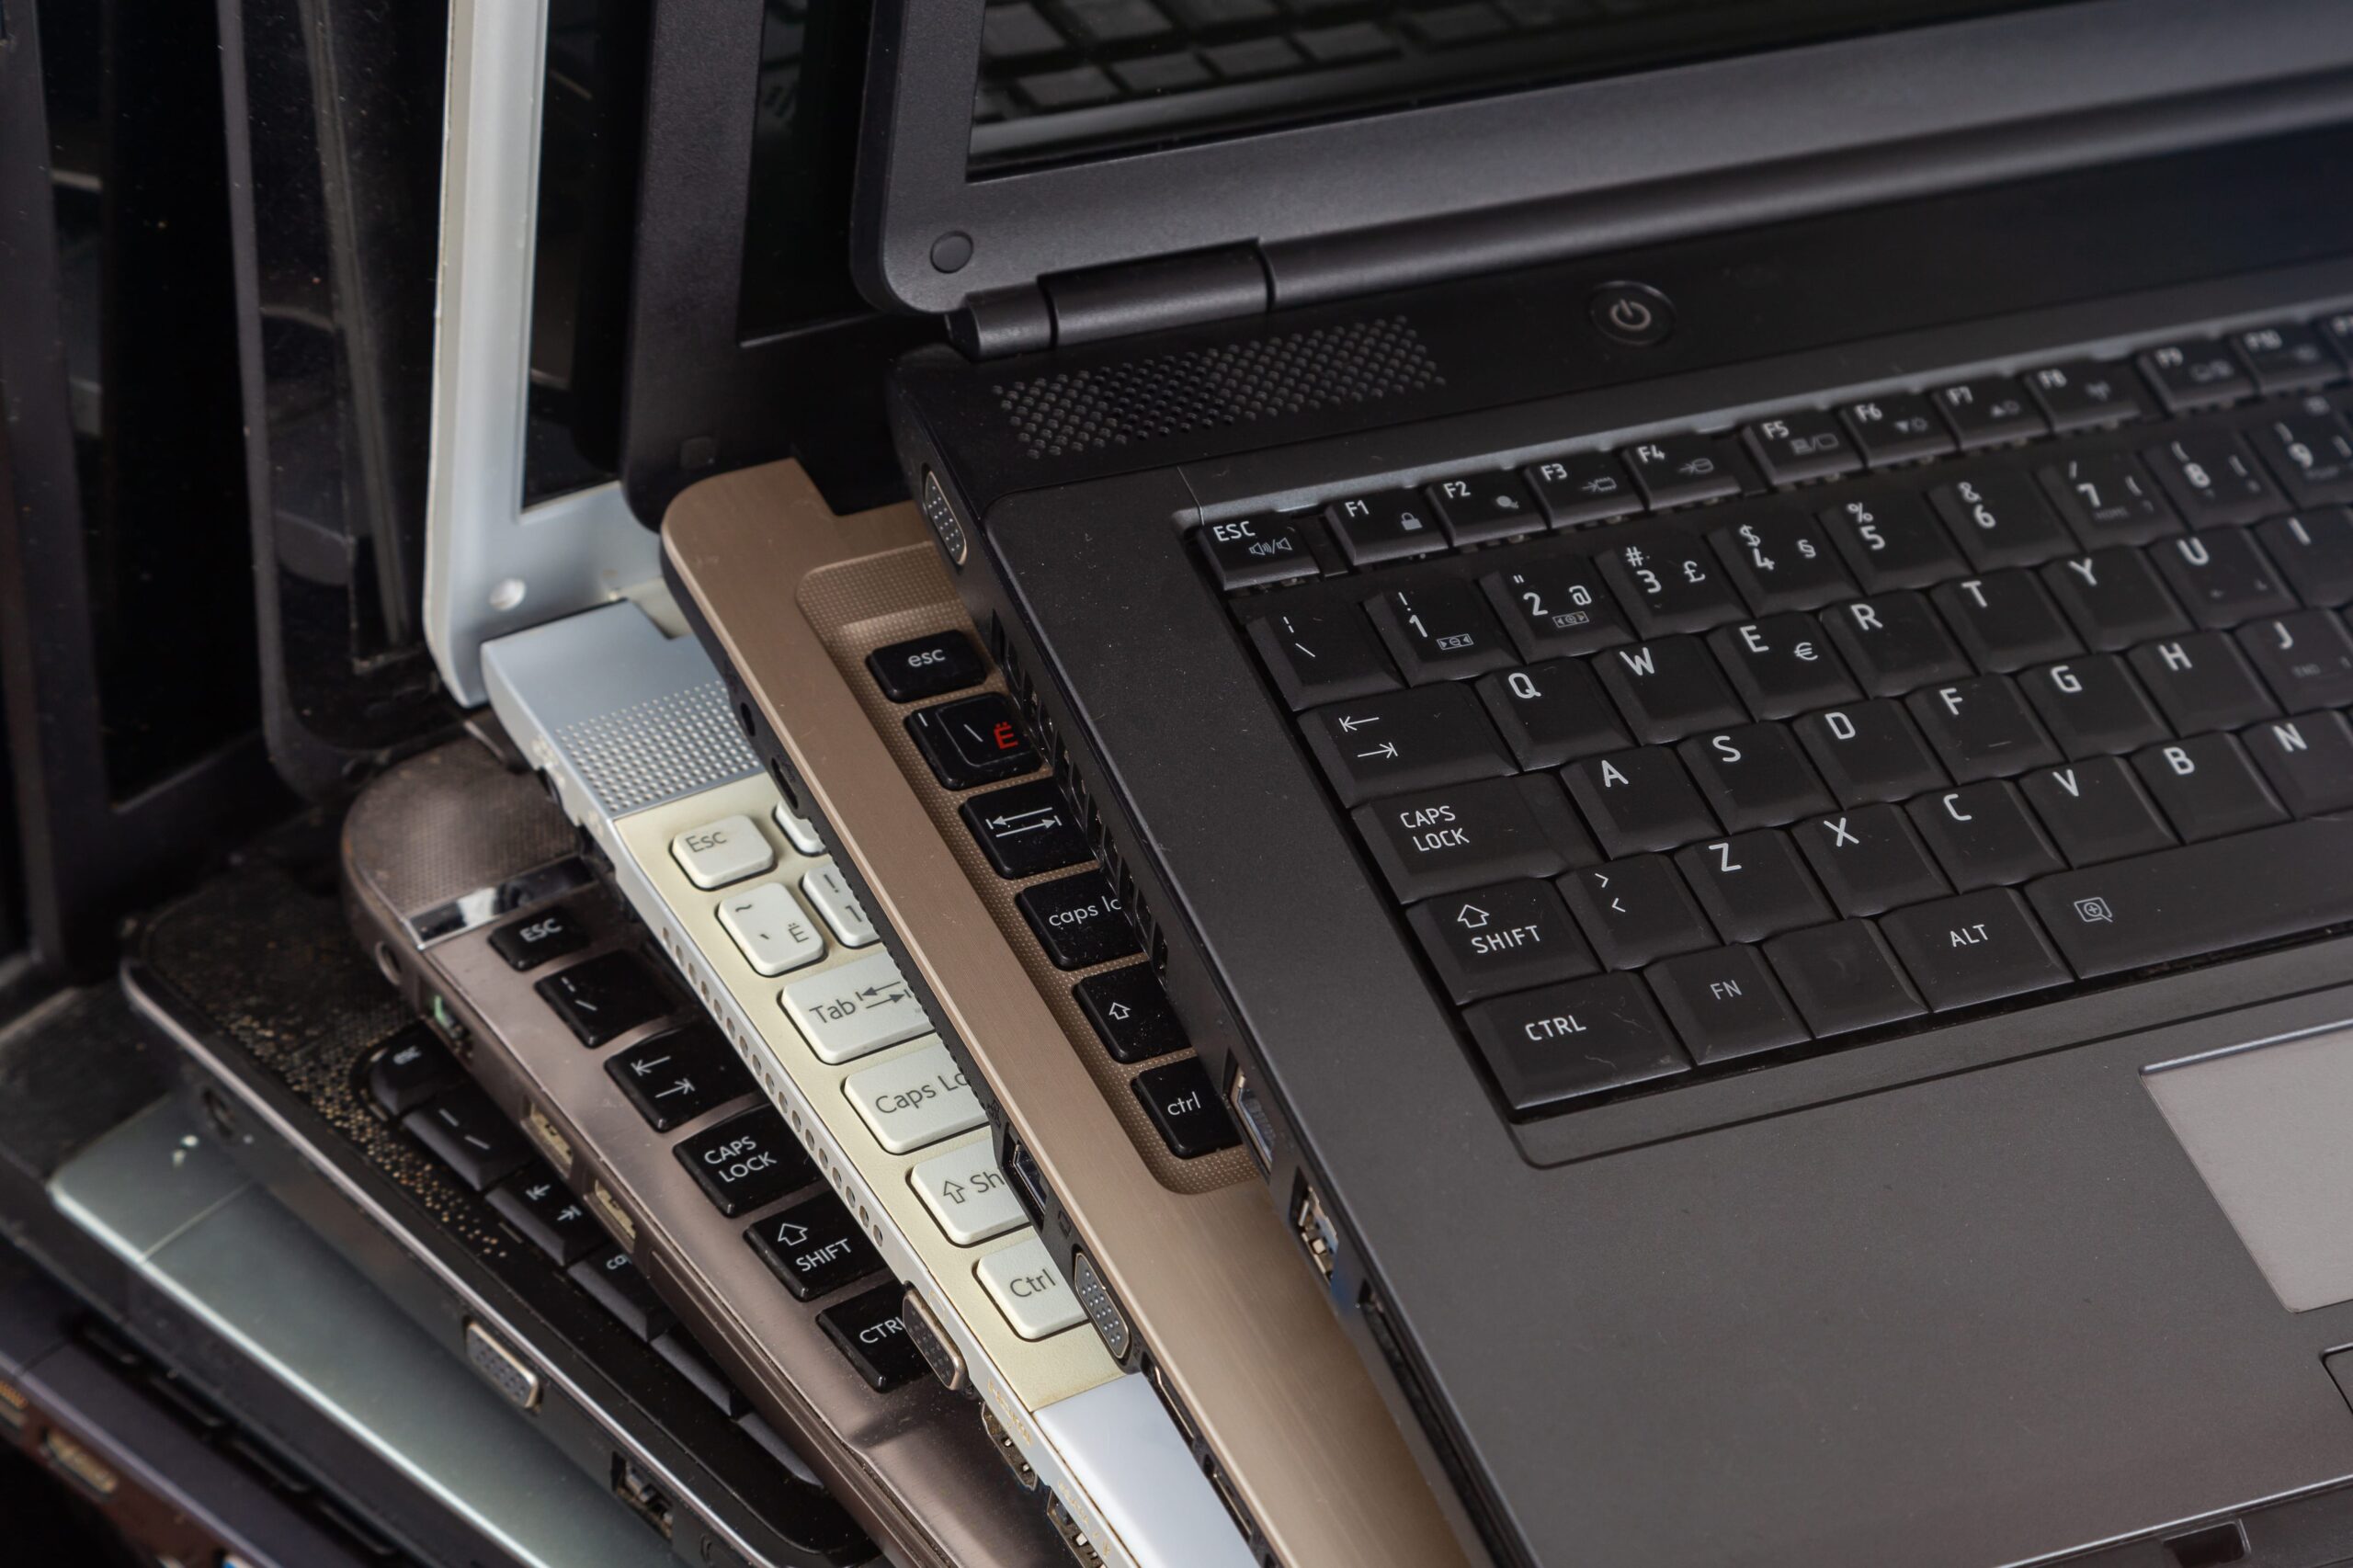 The Best Laptops For Every Type of Use